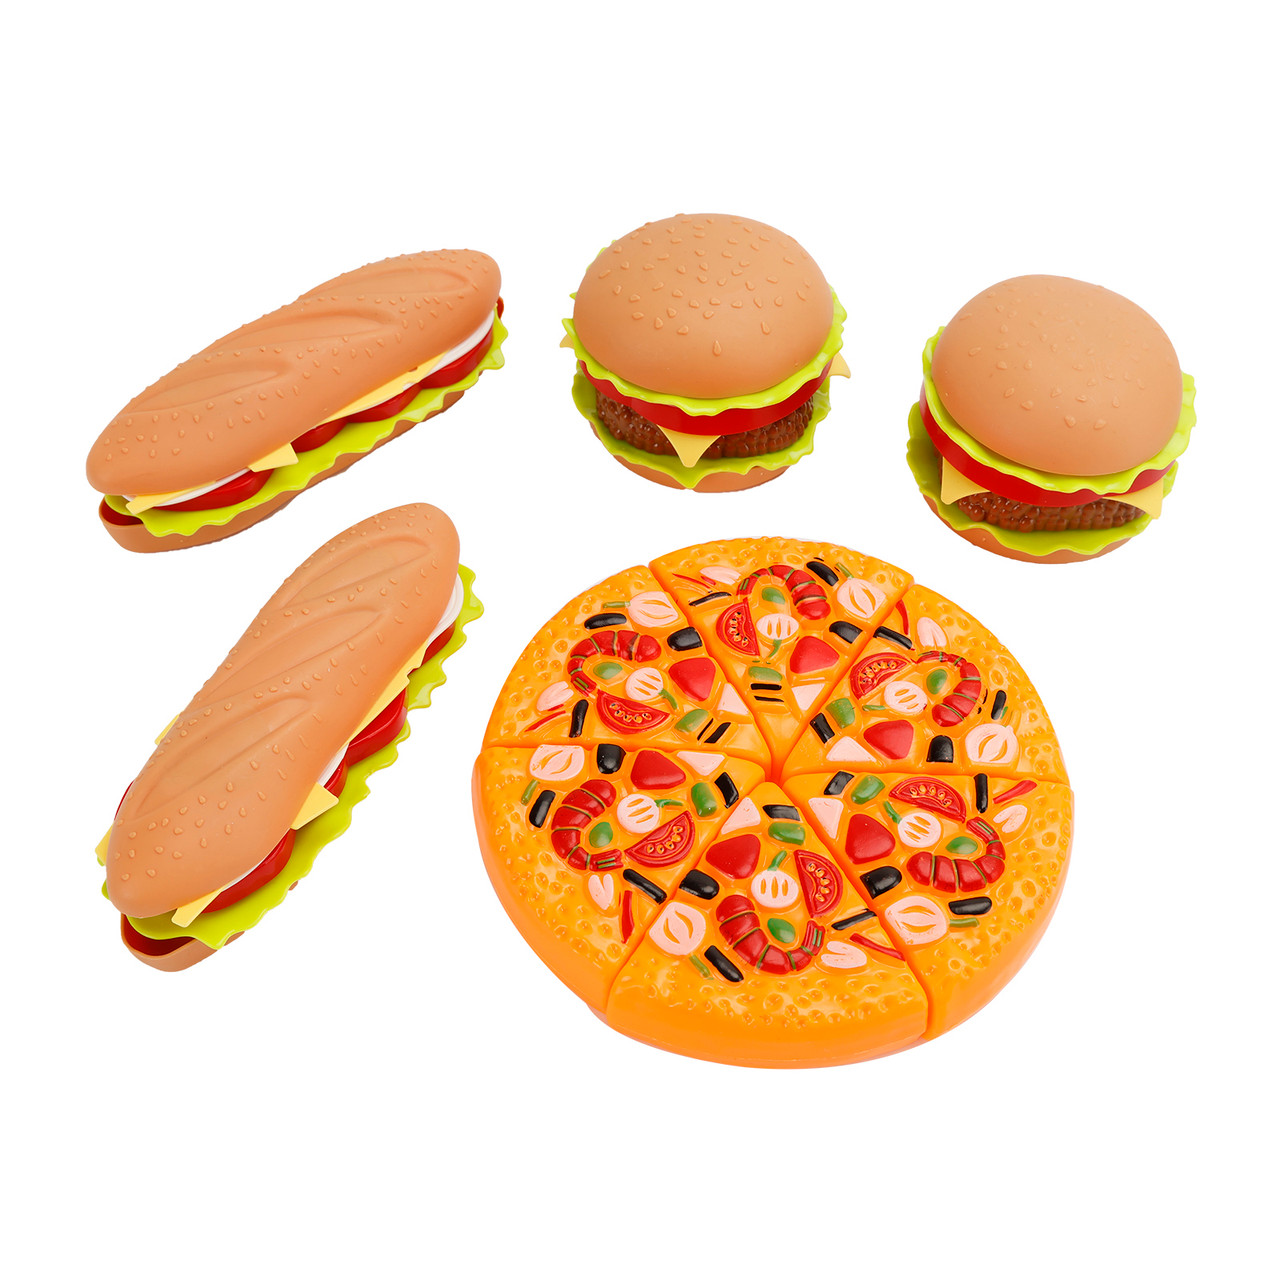 Western Kitchen Toys Simulated Food Toys Burger Pizza Children Pretend Toy Set